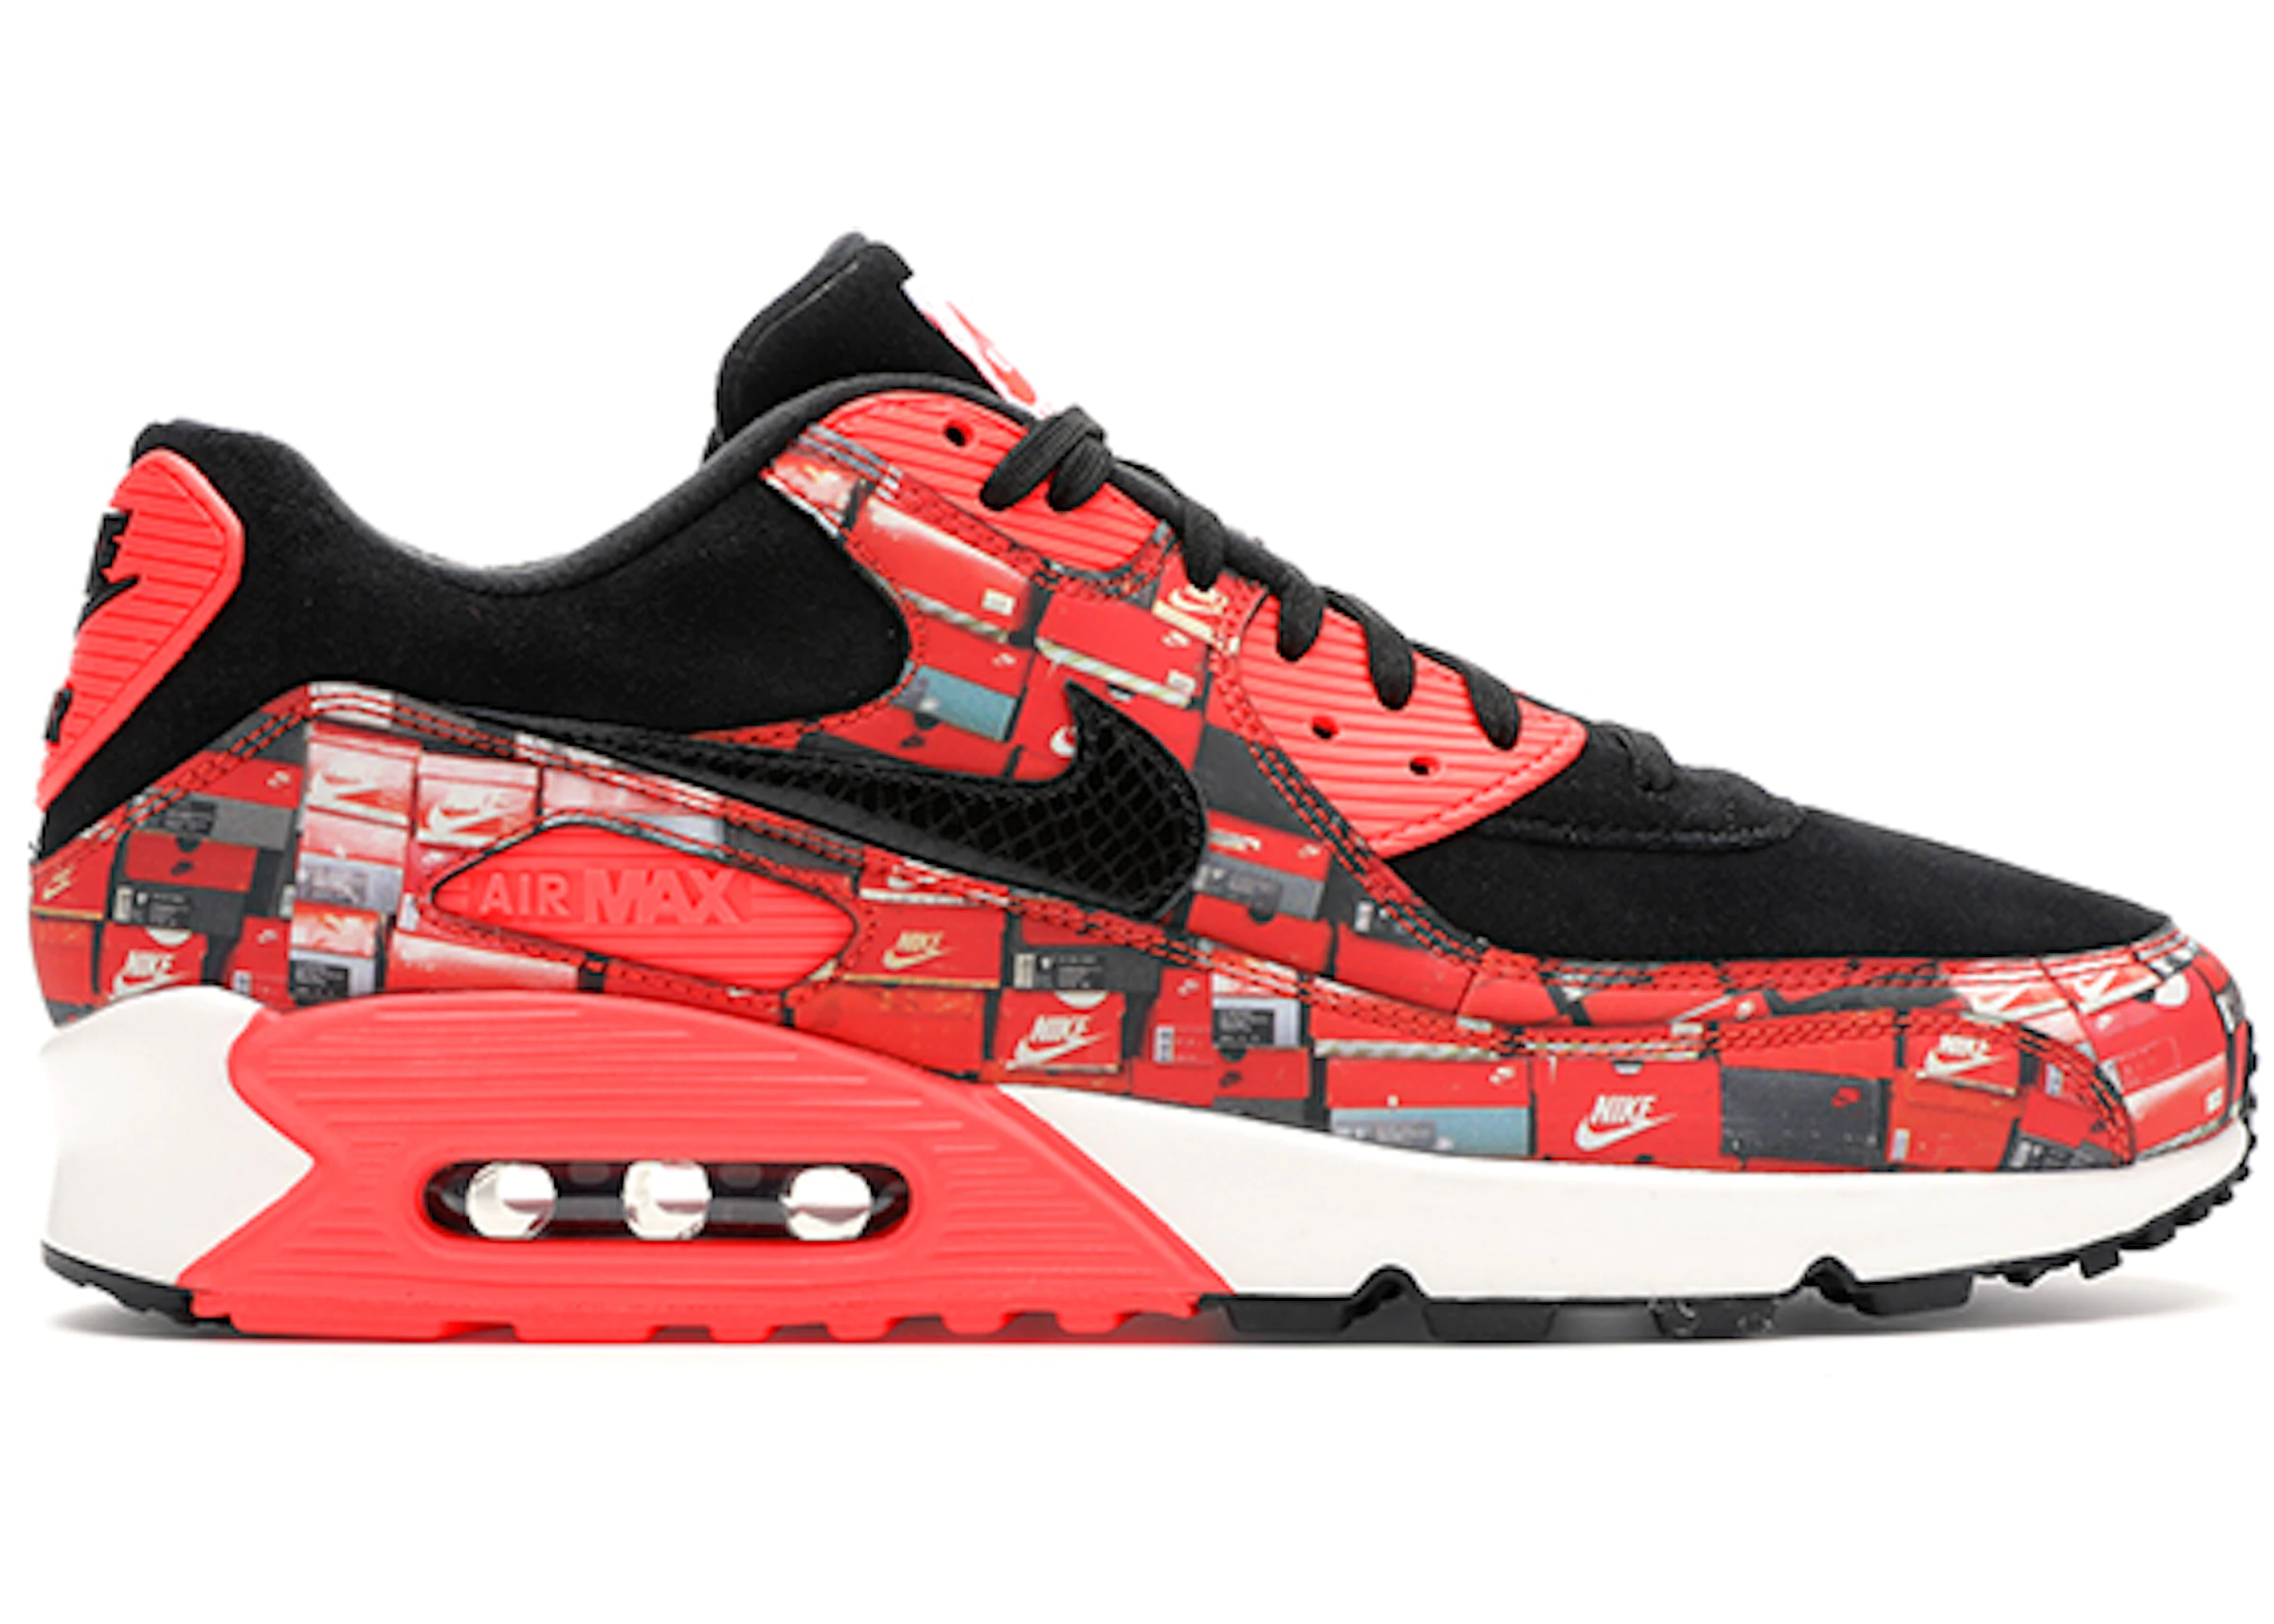 patient mix Bookkeeper Nike Air Max 90 Atmos We Love Nike (Bright Crimson) - AQ0926-001 - US